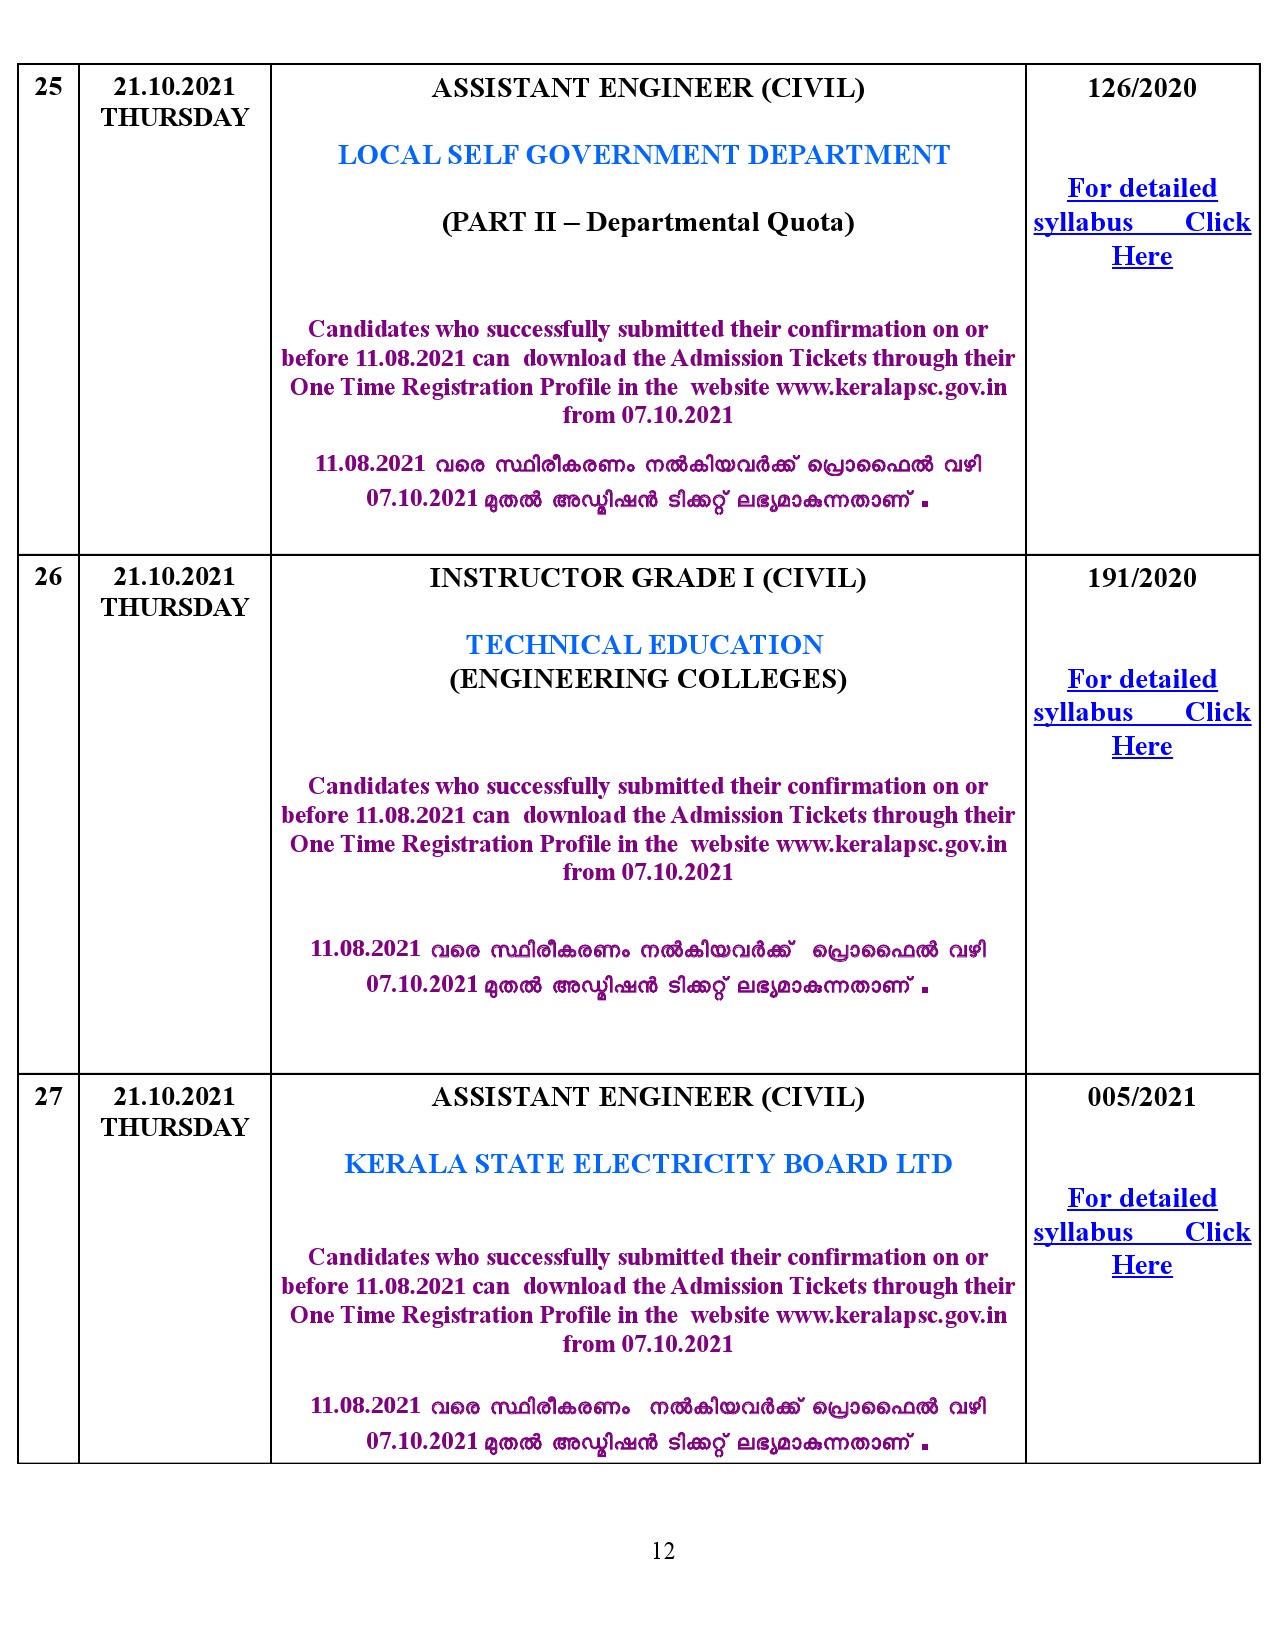 KPSC Examination Programme For The Month Of October 2021 - Notification Image 35